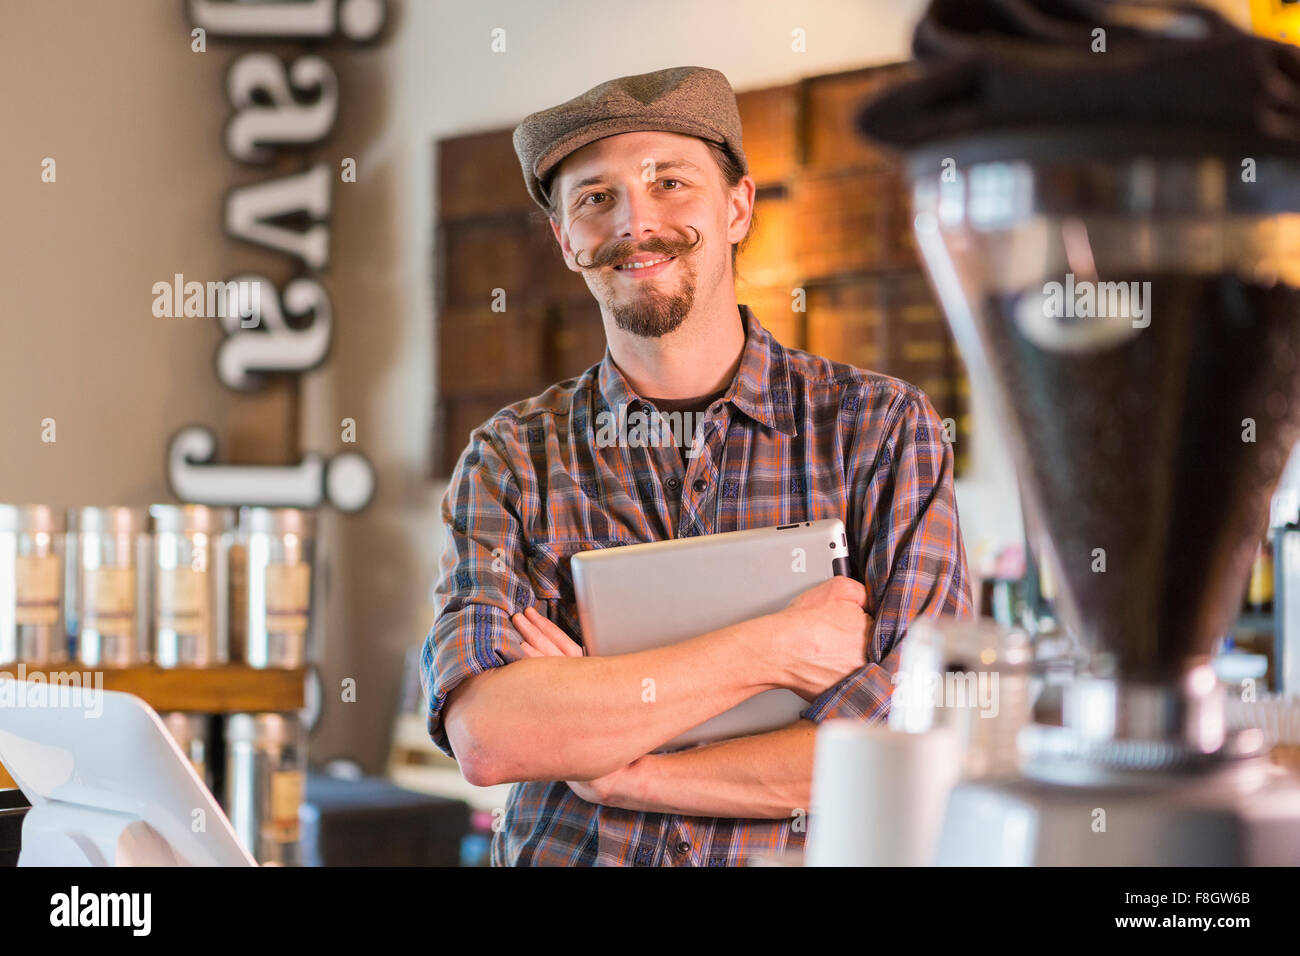 Caucasian barista holding digital tablet in cafe Stock Photo